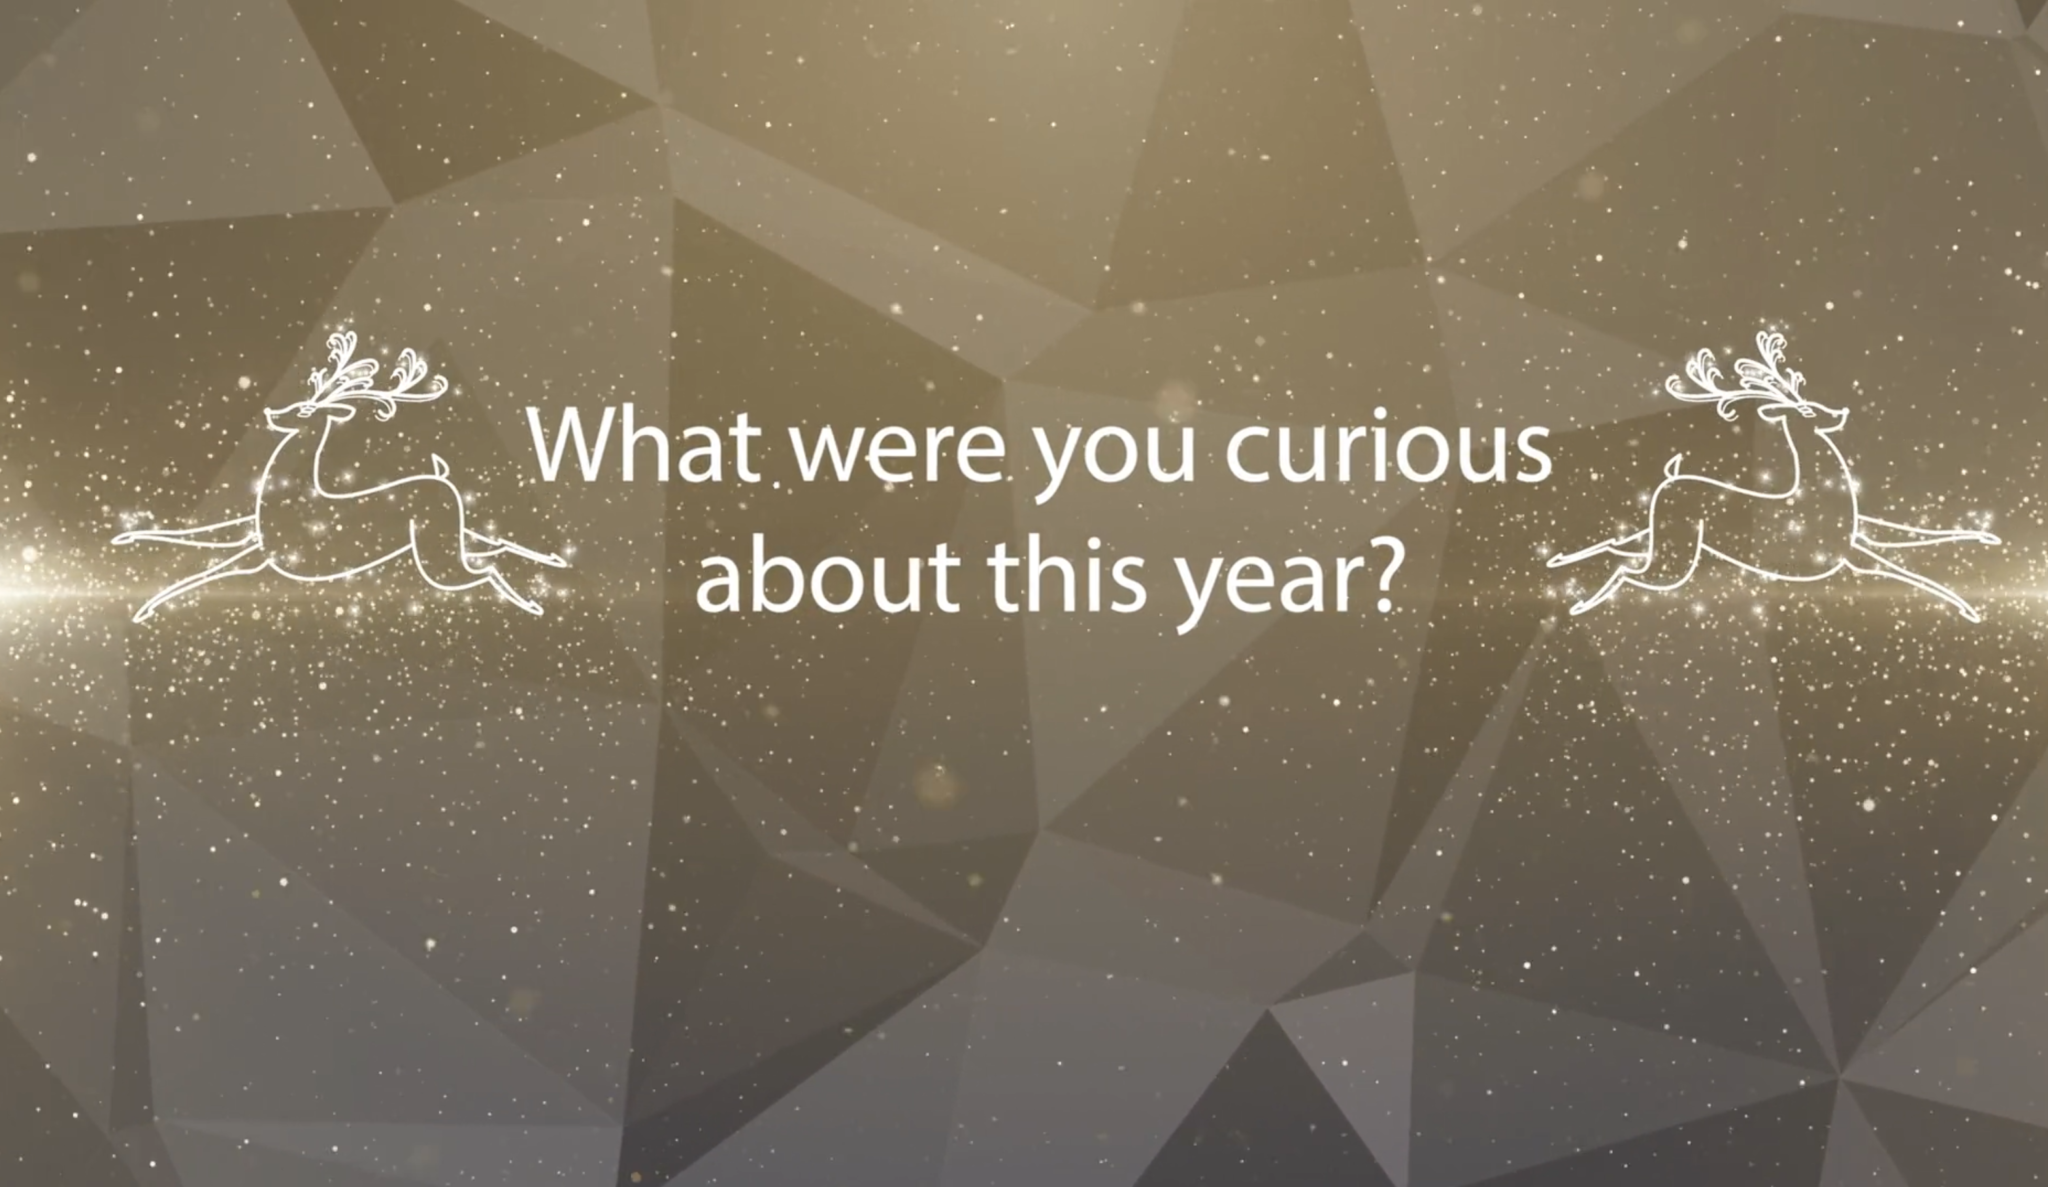 2019: A Year to be Curious